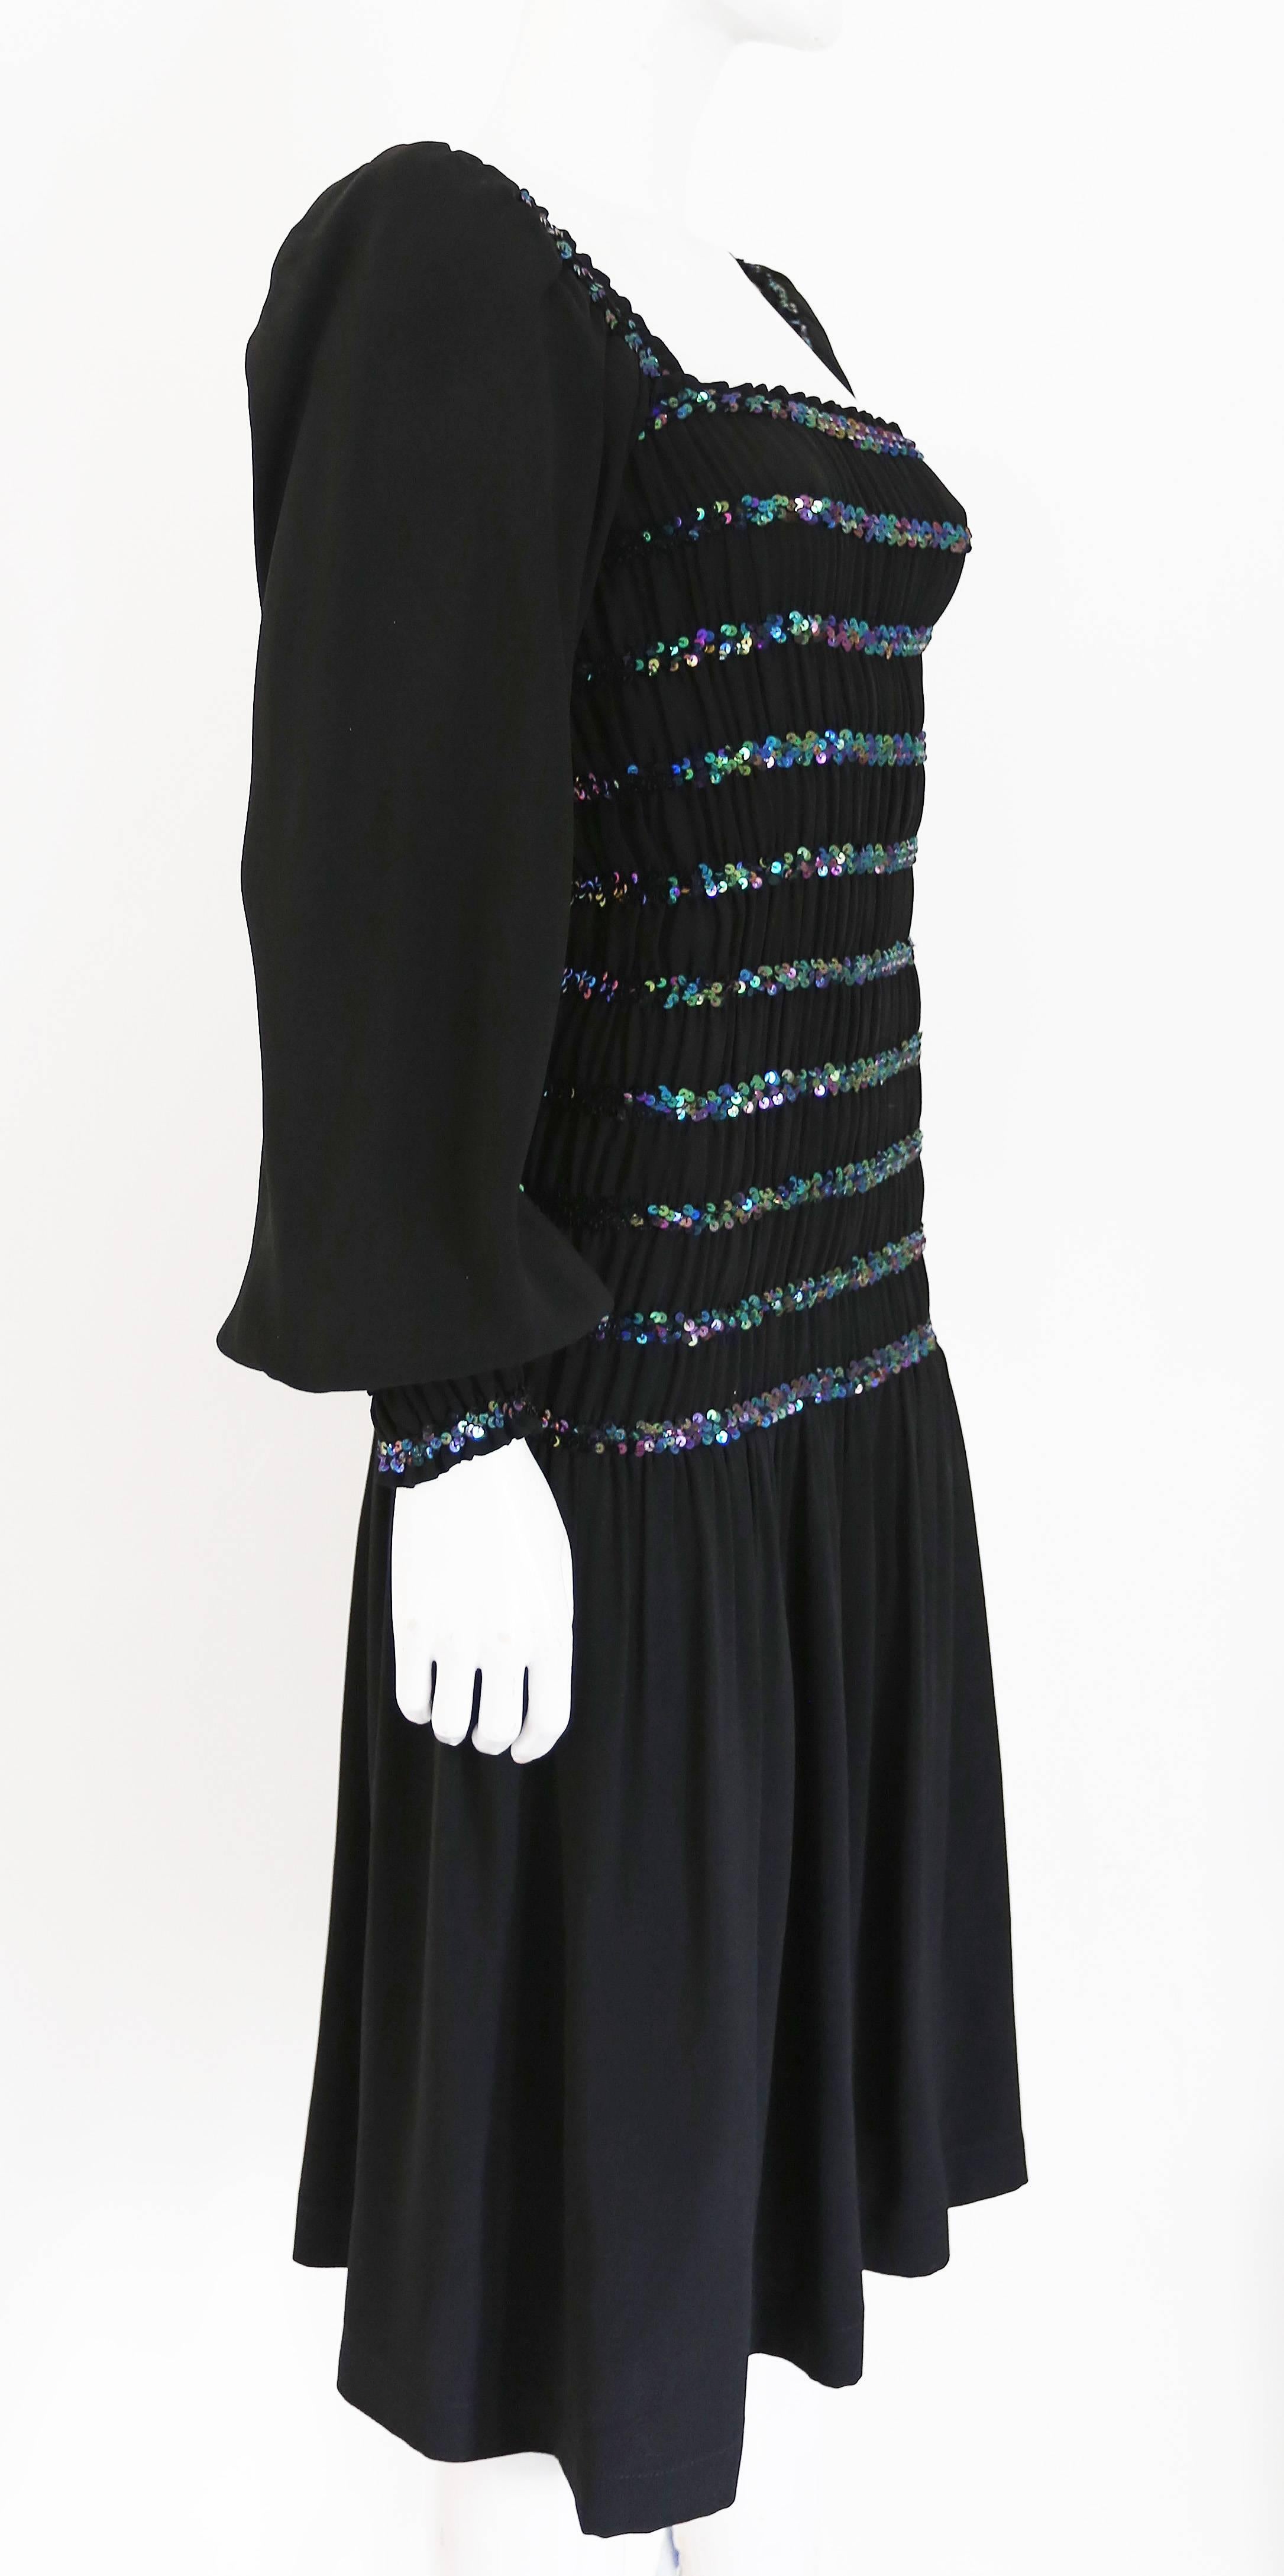 A Yves Saint Laurent party dress, circa 1976-77. The dress is smocked from shoulders to hips, has a square neckline, sequin embellishment and ruffled cuffs. 

Fr 36  UK 8  Small